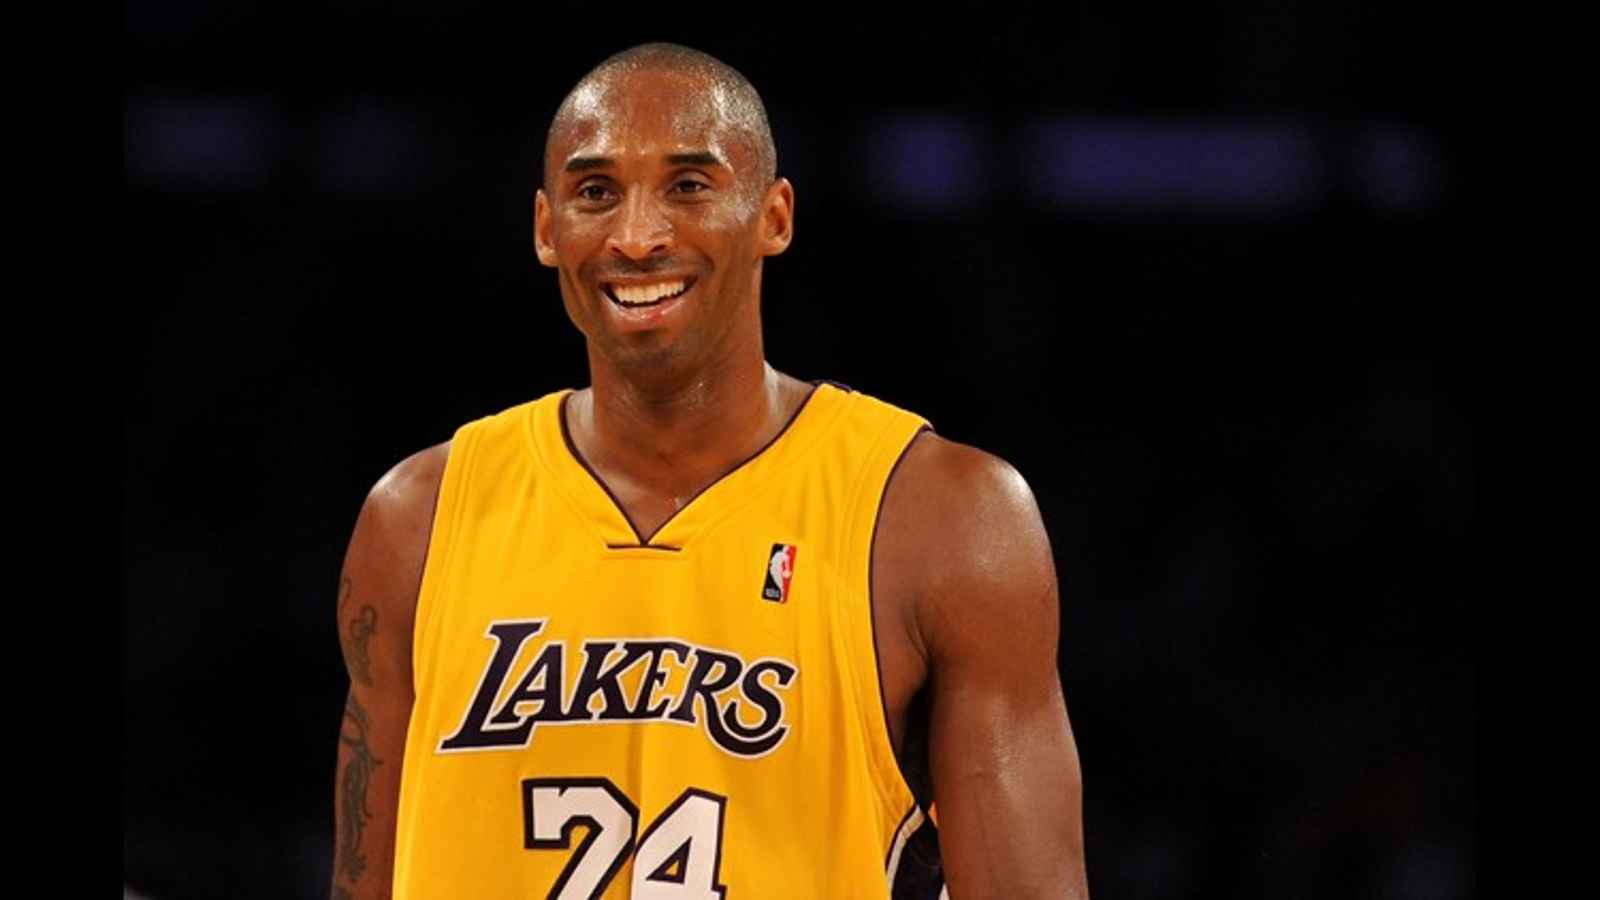 Kobe Bryant Day 2023: Date, History, How to Participate